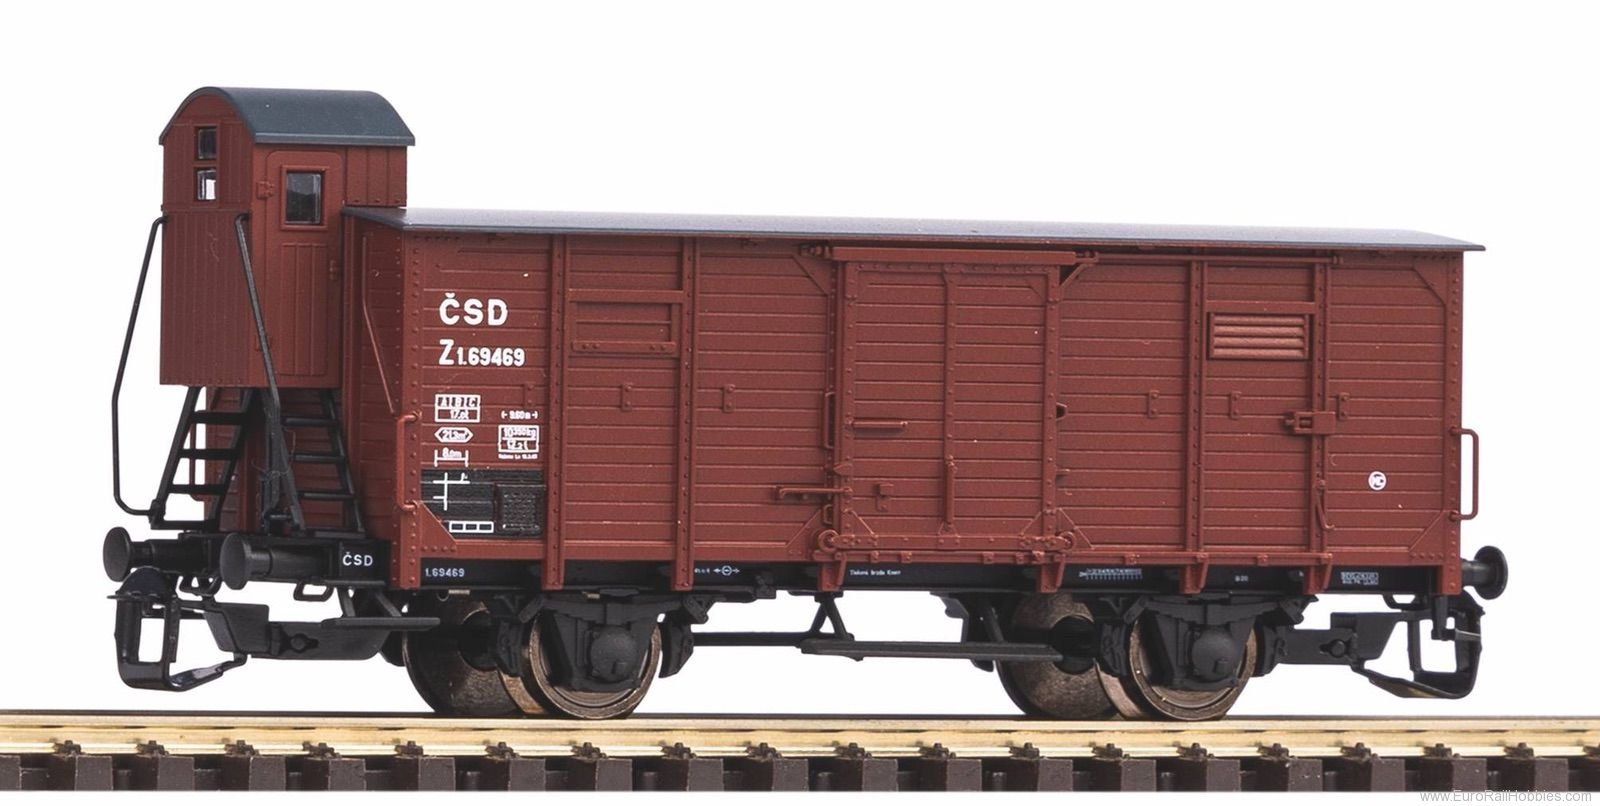 Piko 47763 TT Covered Freight Car G02 CSD III with a bra